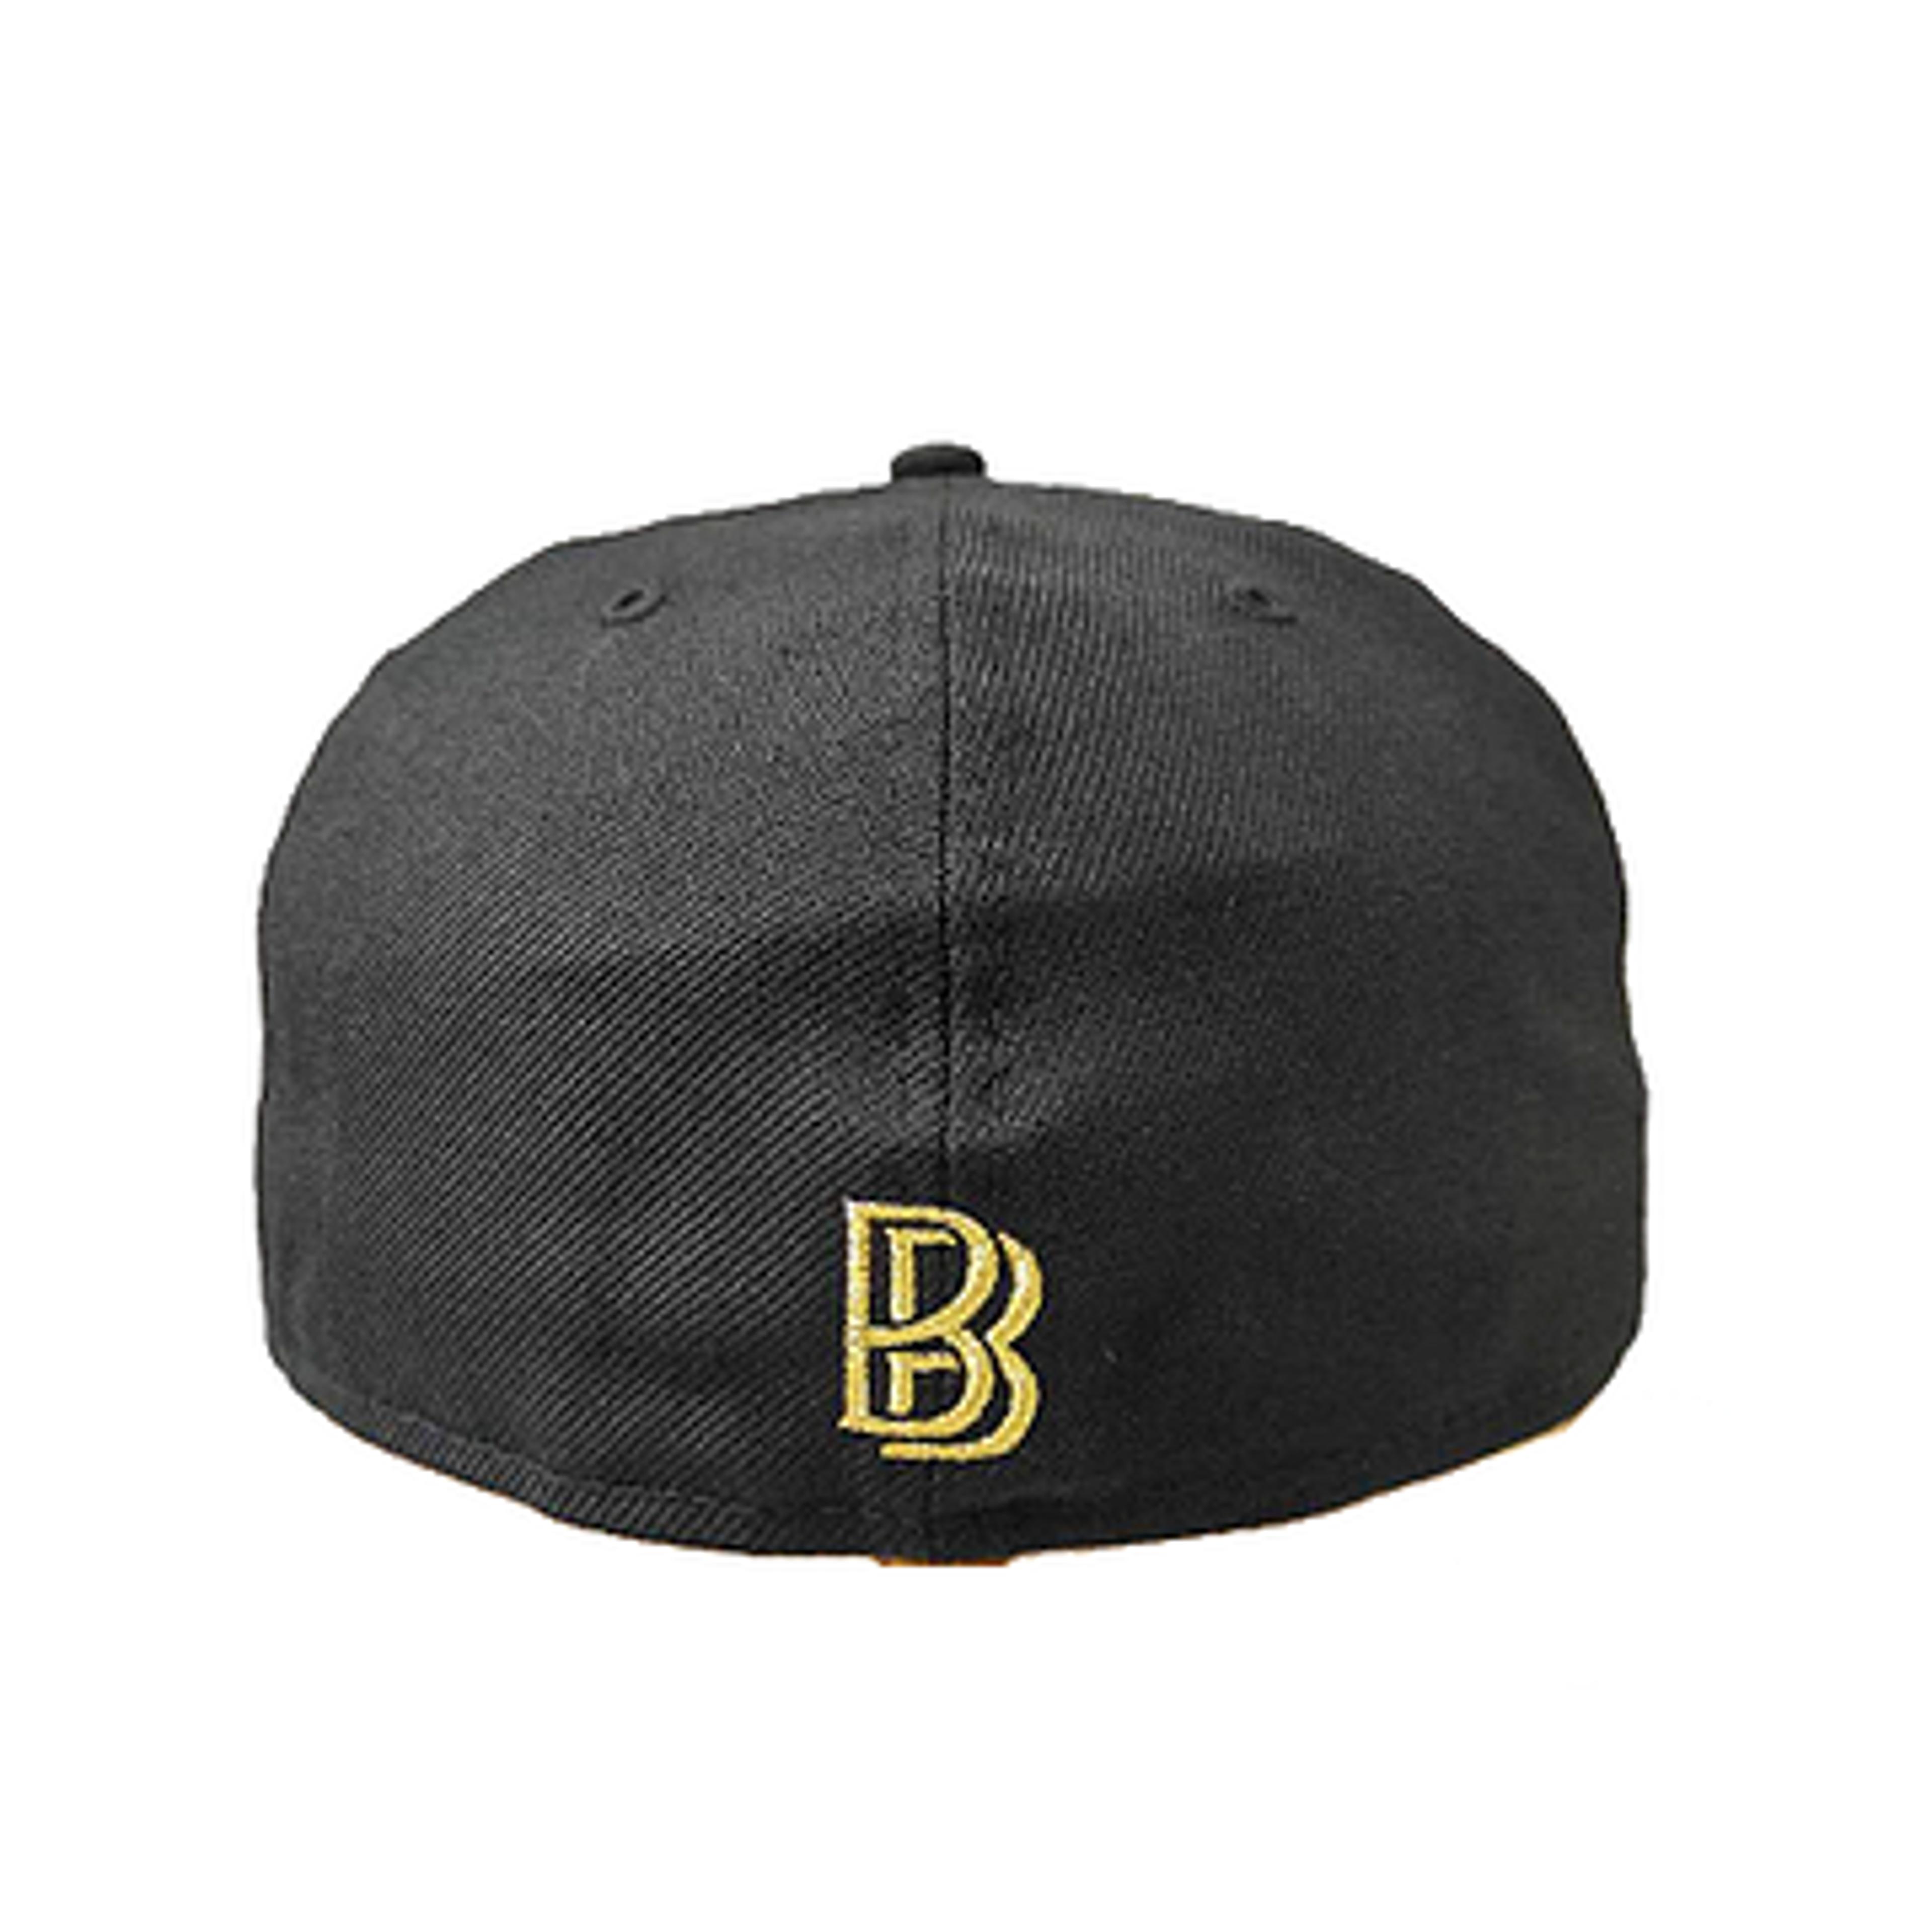 Alternate View 2 of Los Angeles Lakers - Ben Baller 59FIFTY Black